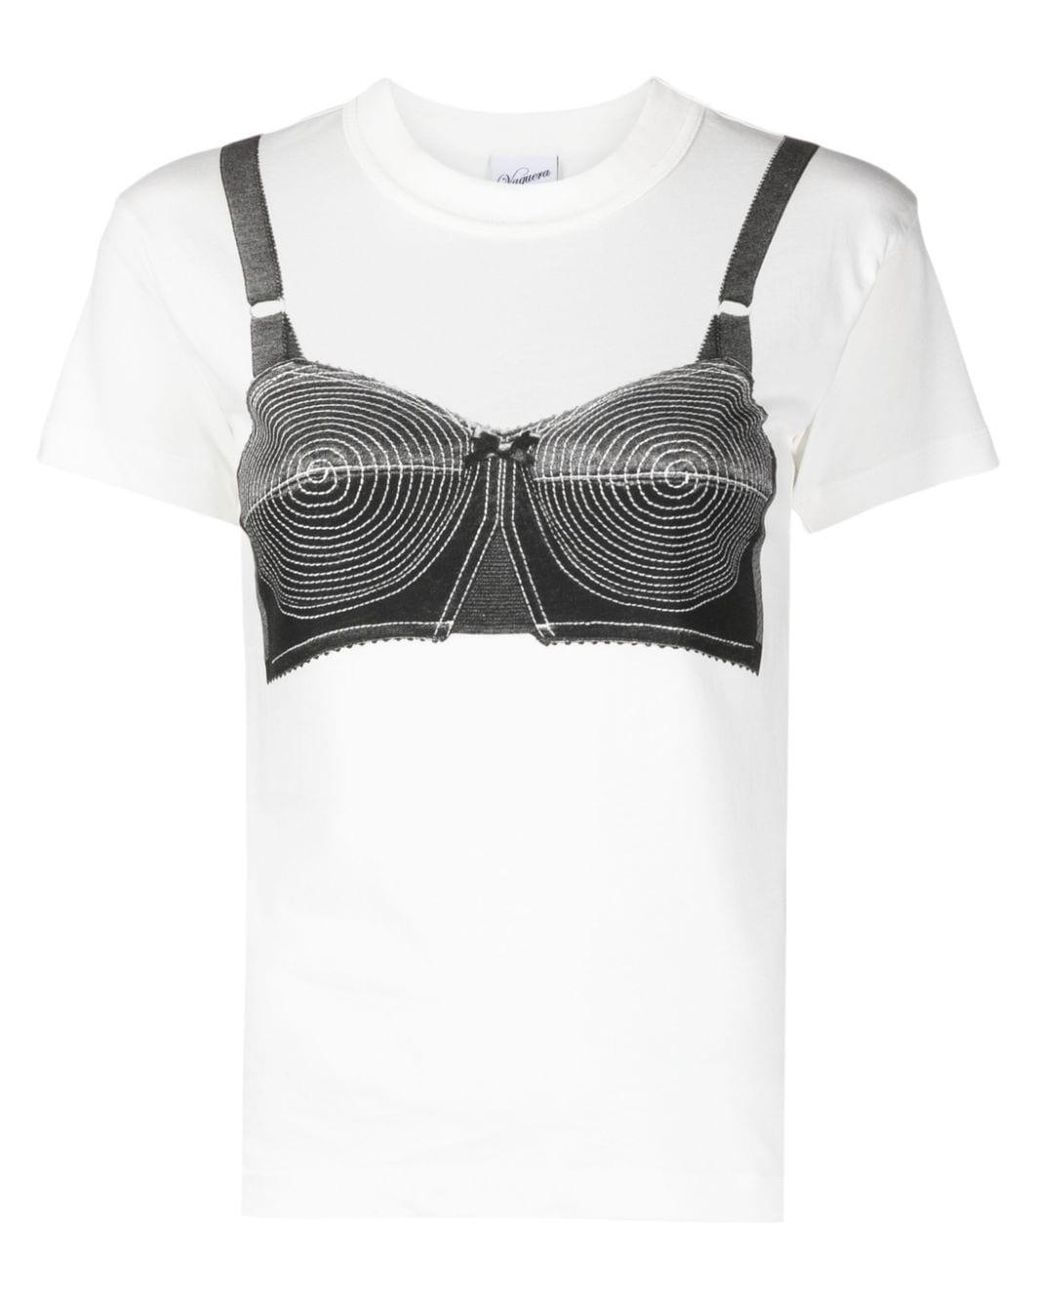 Vaquera Lingerie Printed Oversized T-shirt